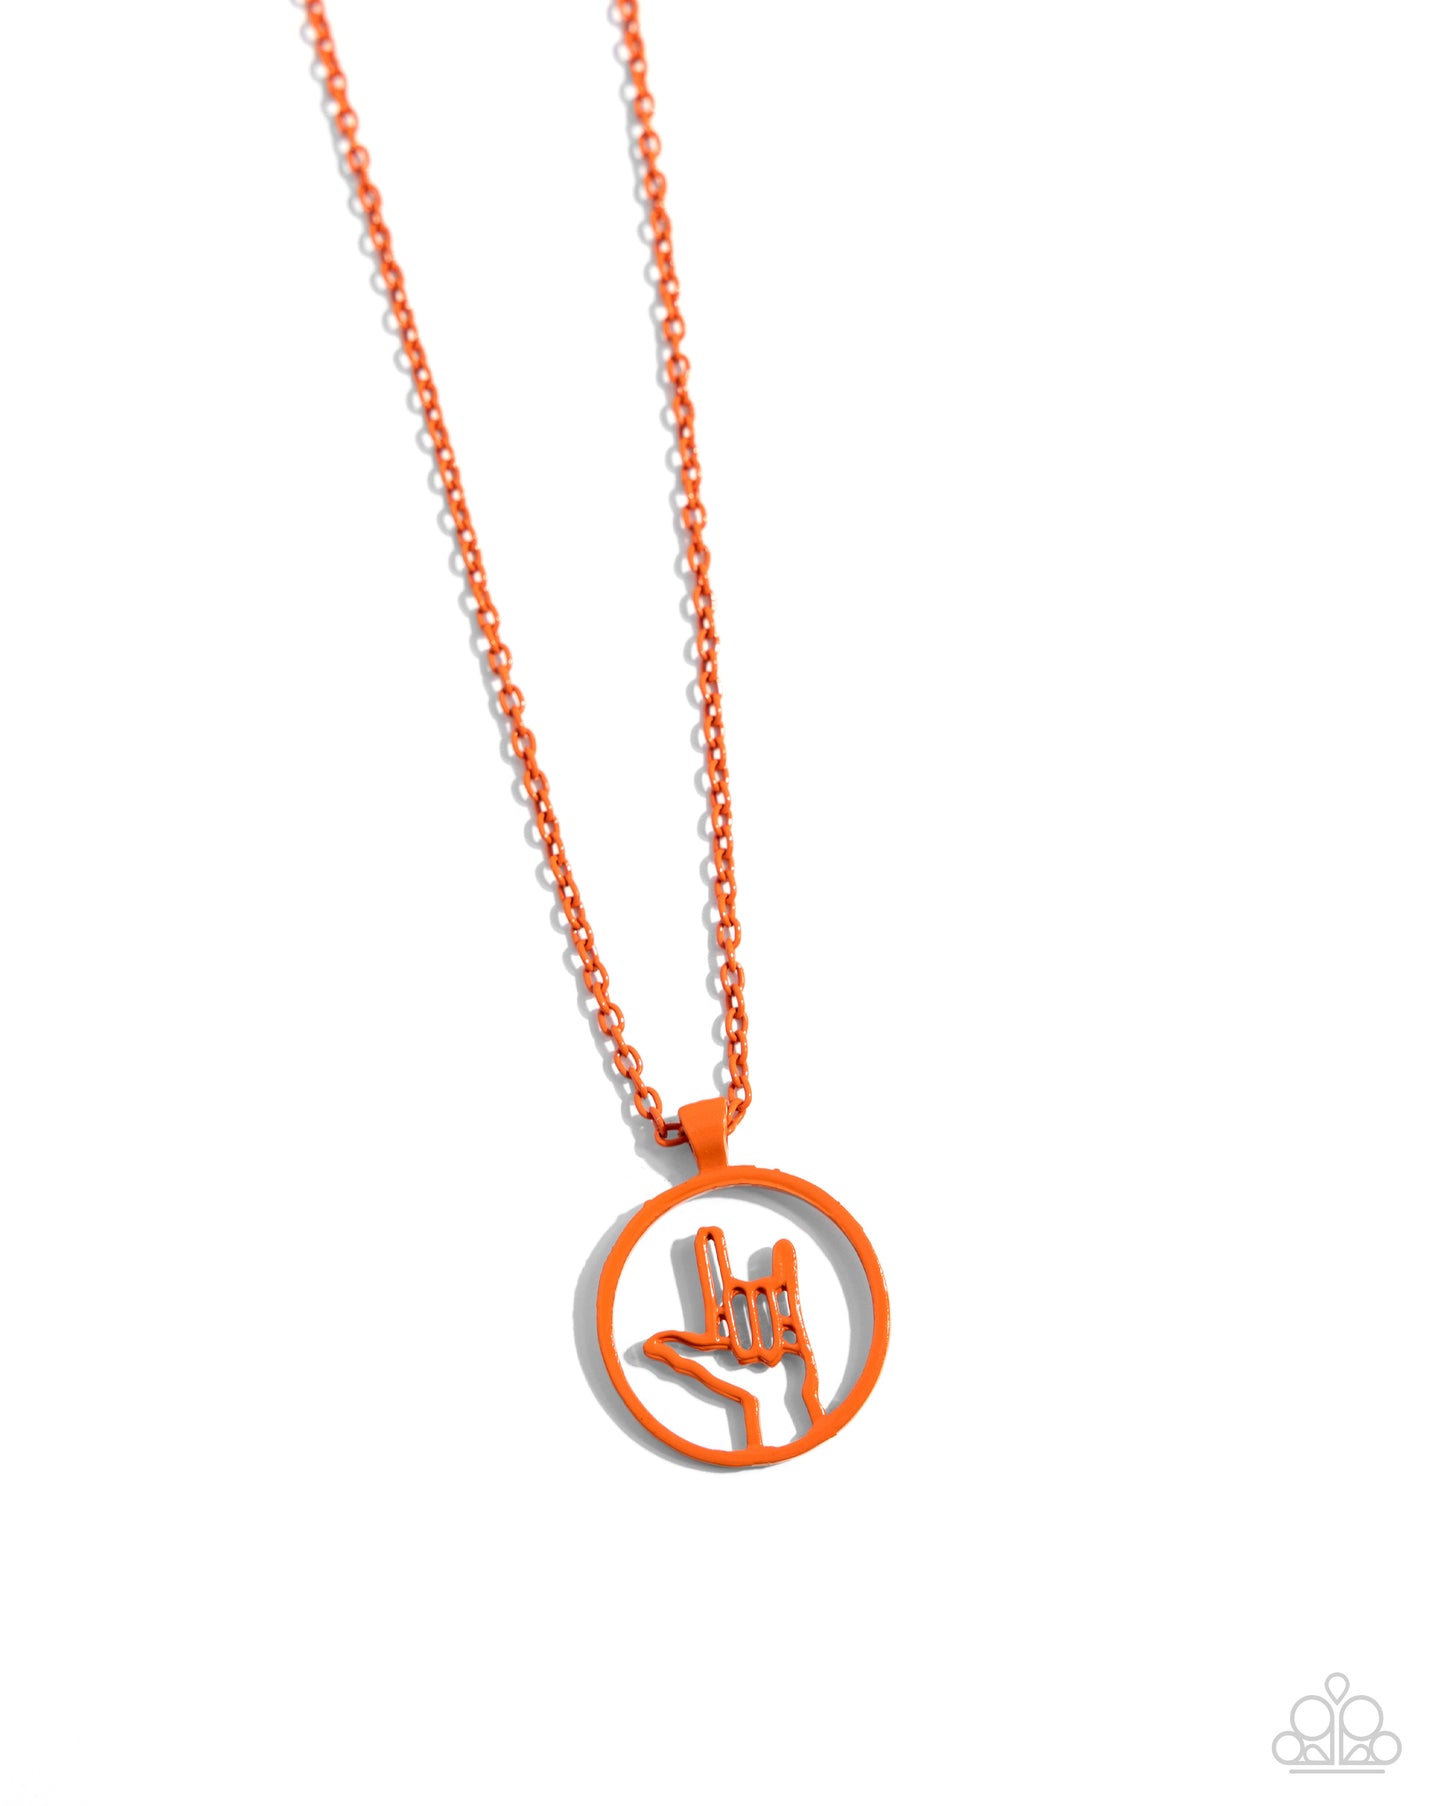 Abstract ASL Orange "I Love You" Necklace - Paparazzi Accessories Dipped in a vibrant orange hue, an airy pendant featuring an ASL "I love you" sign glides along a dainty chain for a colorful, visually interesting display. Features an adjustable clasp closure. Sold as one individual necklace. Includes one pair of matching earrings. SKU: P2DA-OGXX-086XX